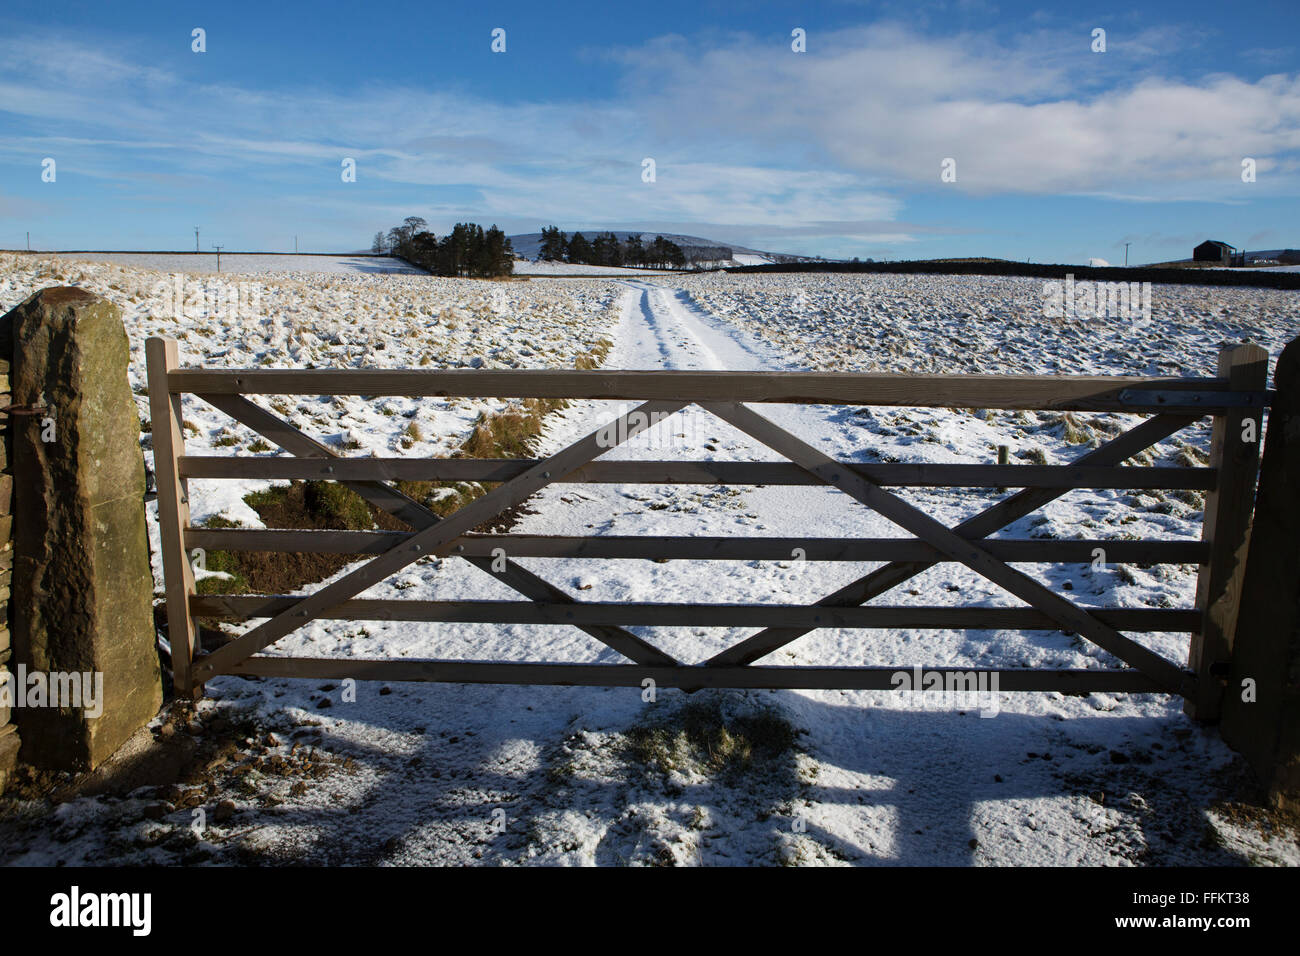 A five bar gate in Upper Teesdale in County Durham, England. The gate keeps a farmer's field closed. Stock Photo